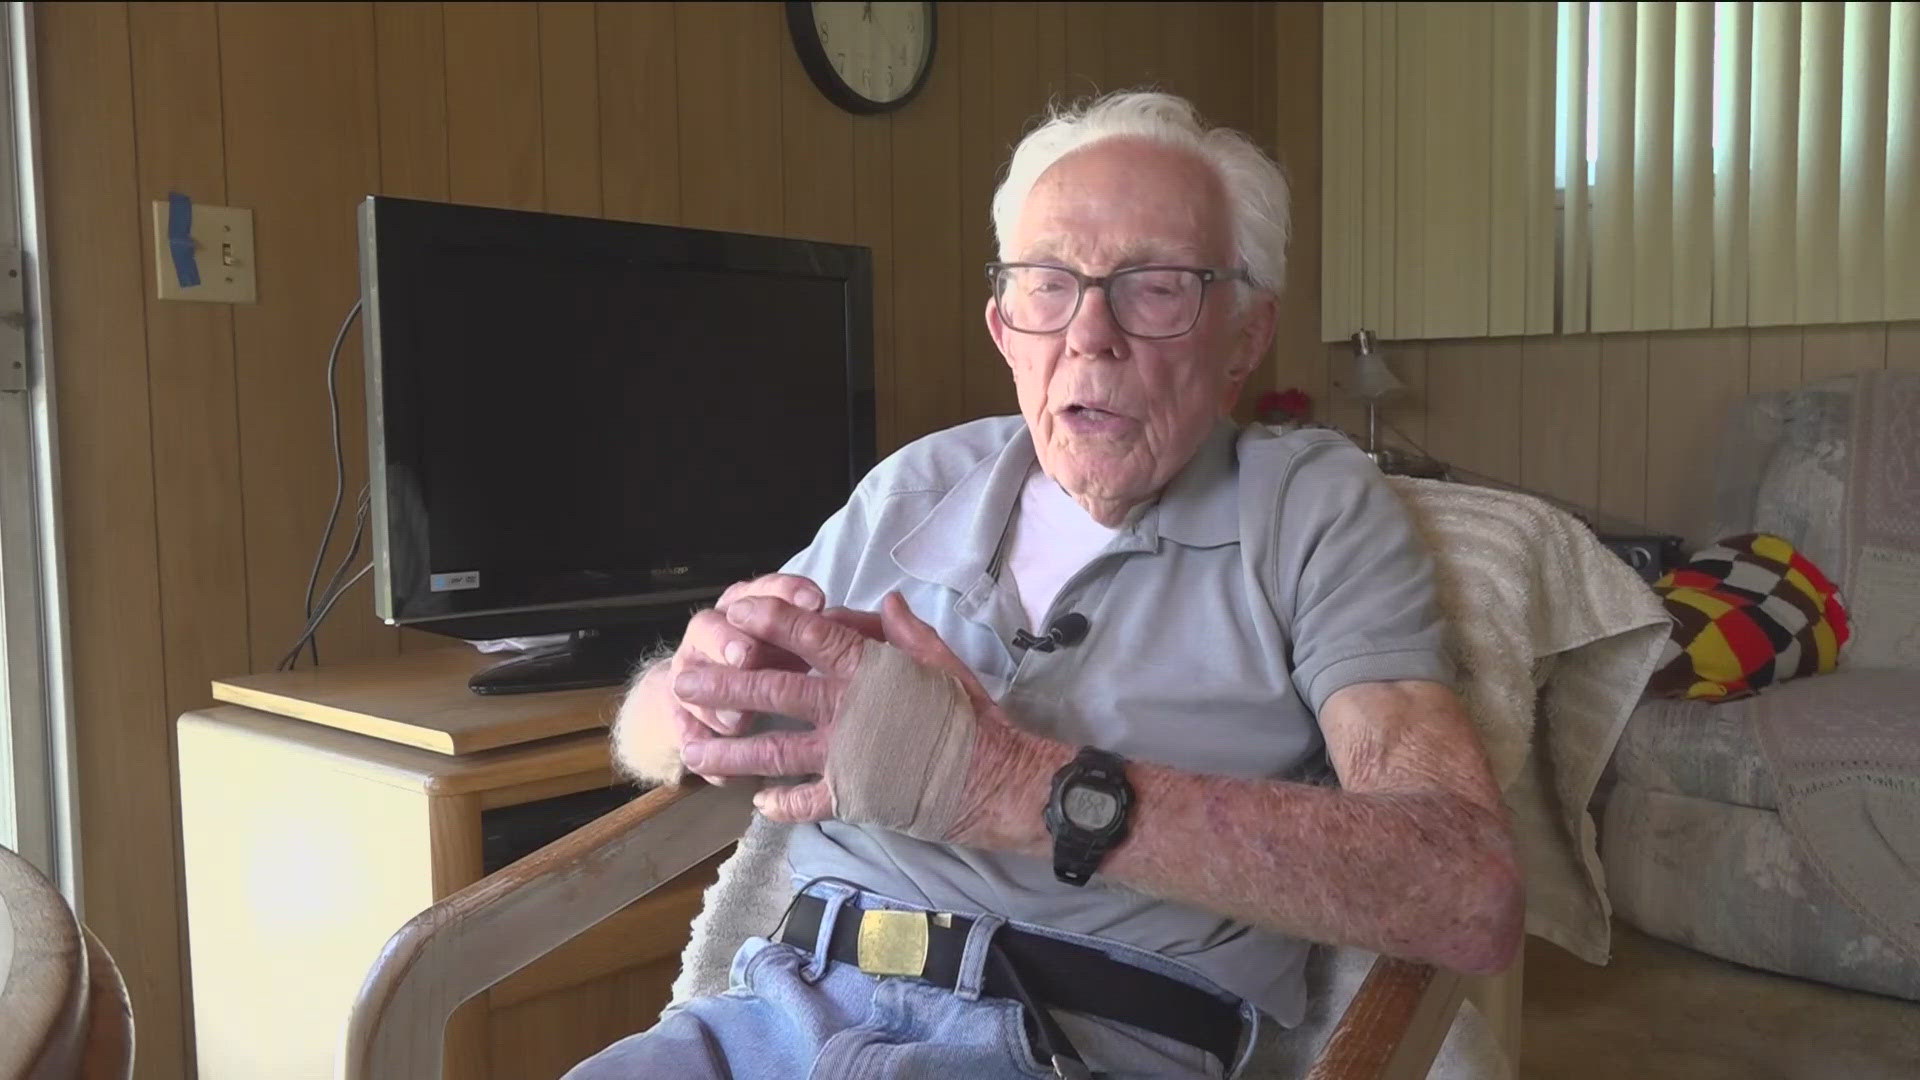 Memories of some things have faded for Bob Wilson, 104, but he vividly remembers arriving in Normandy on D-Day.